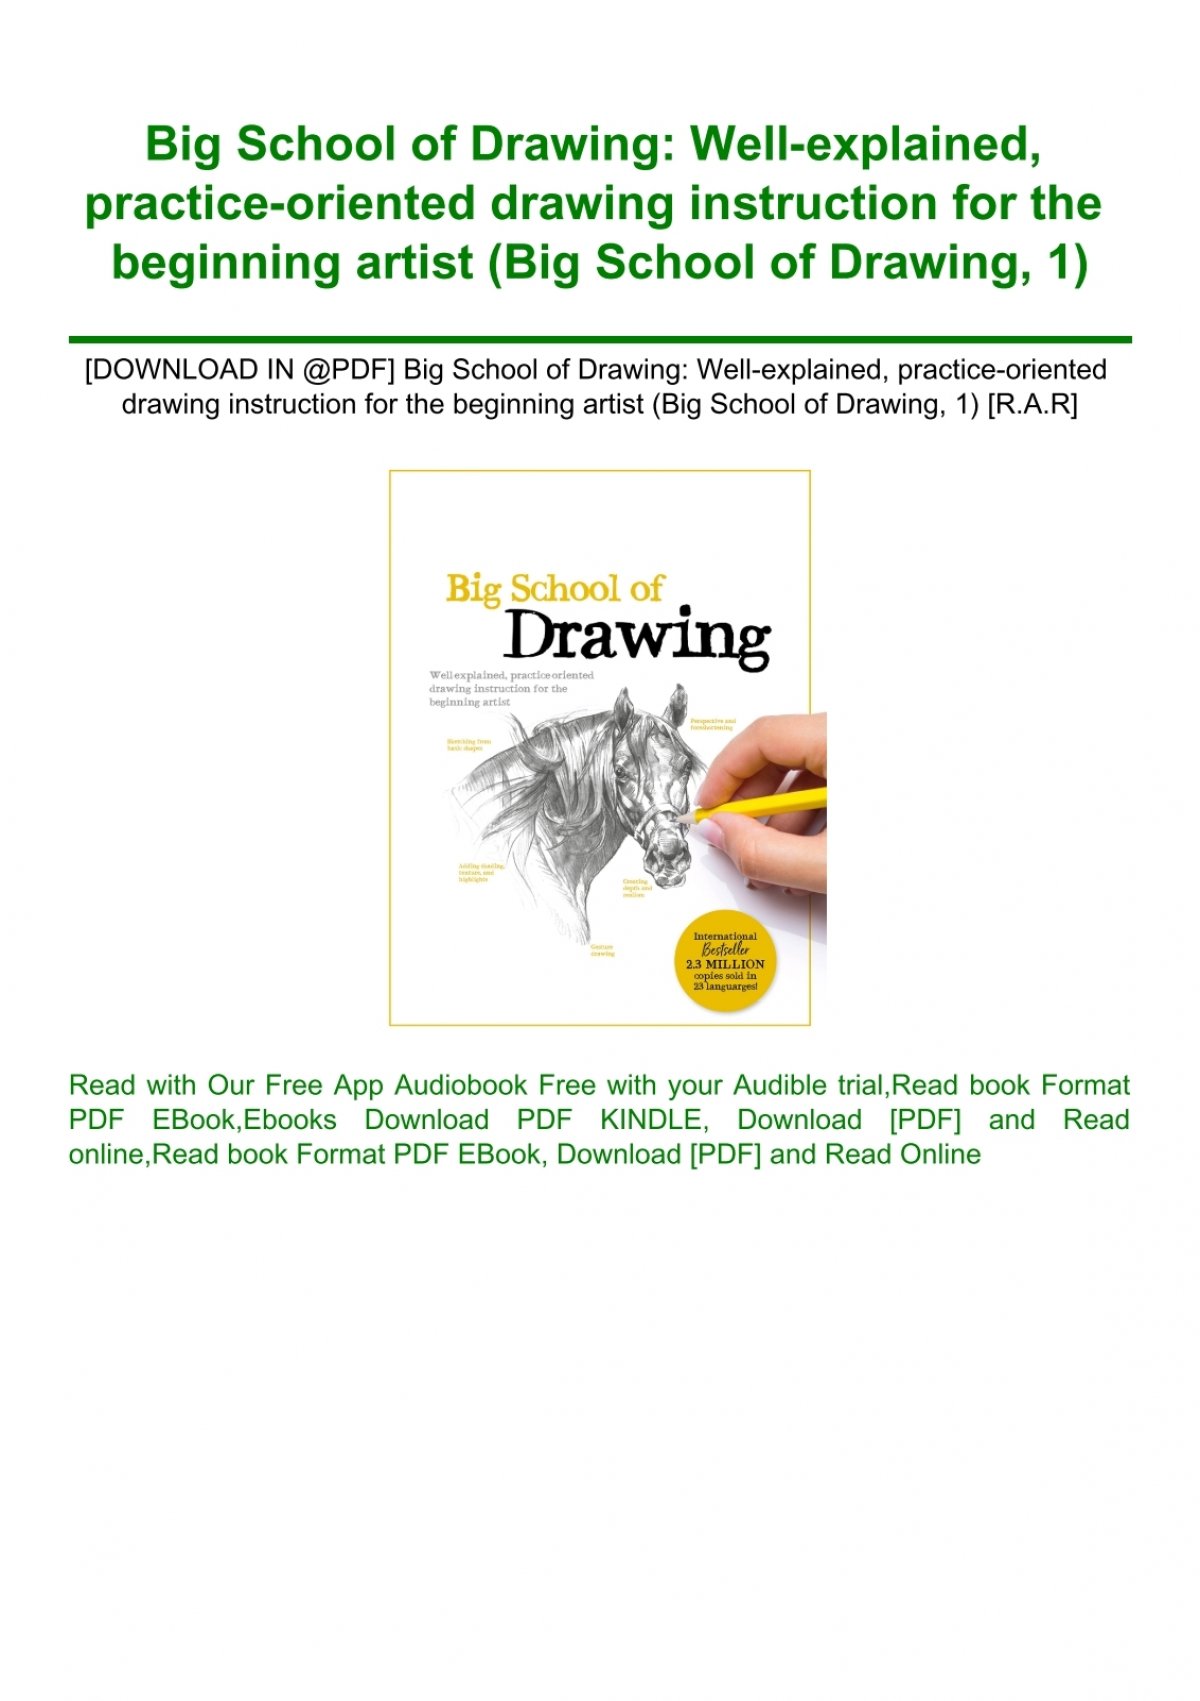 Big School of Drawing: Well-explained, practice-oriented drawing  instruction for the beginning artist (Big School of Drawing, 1)